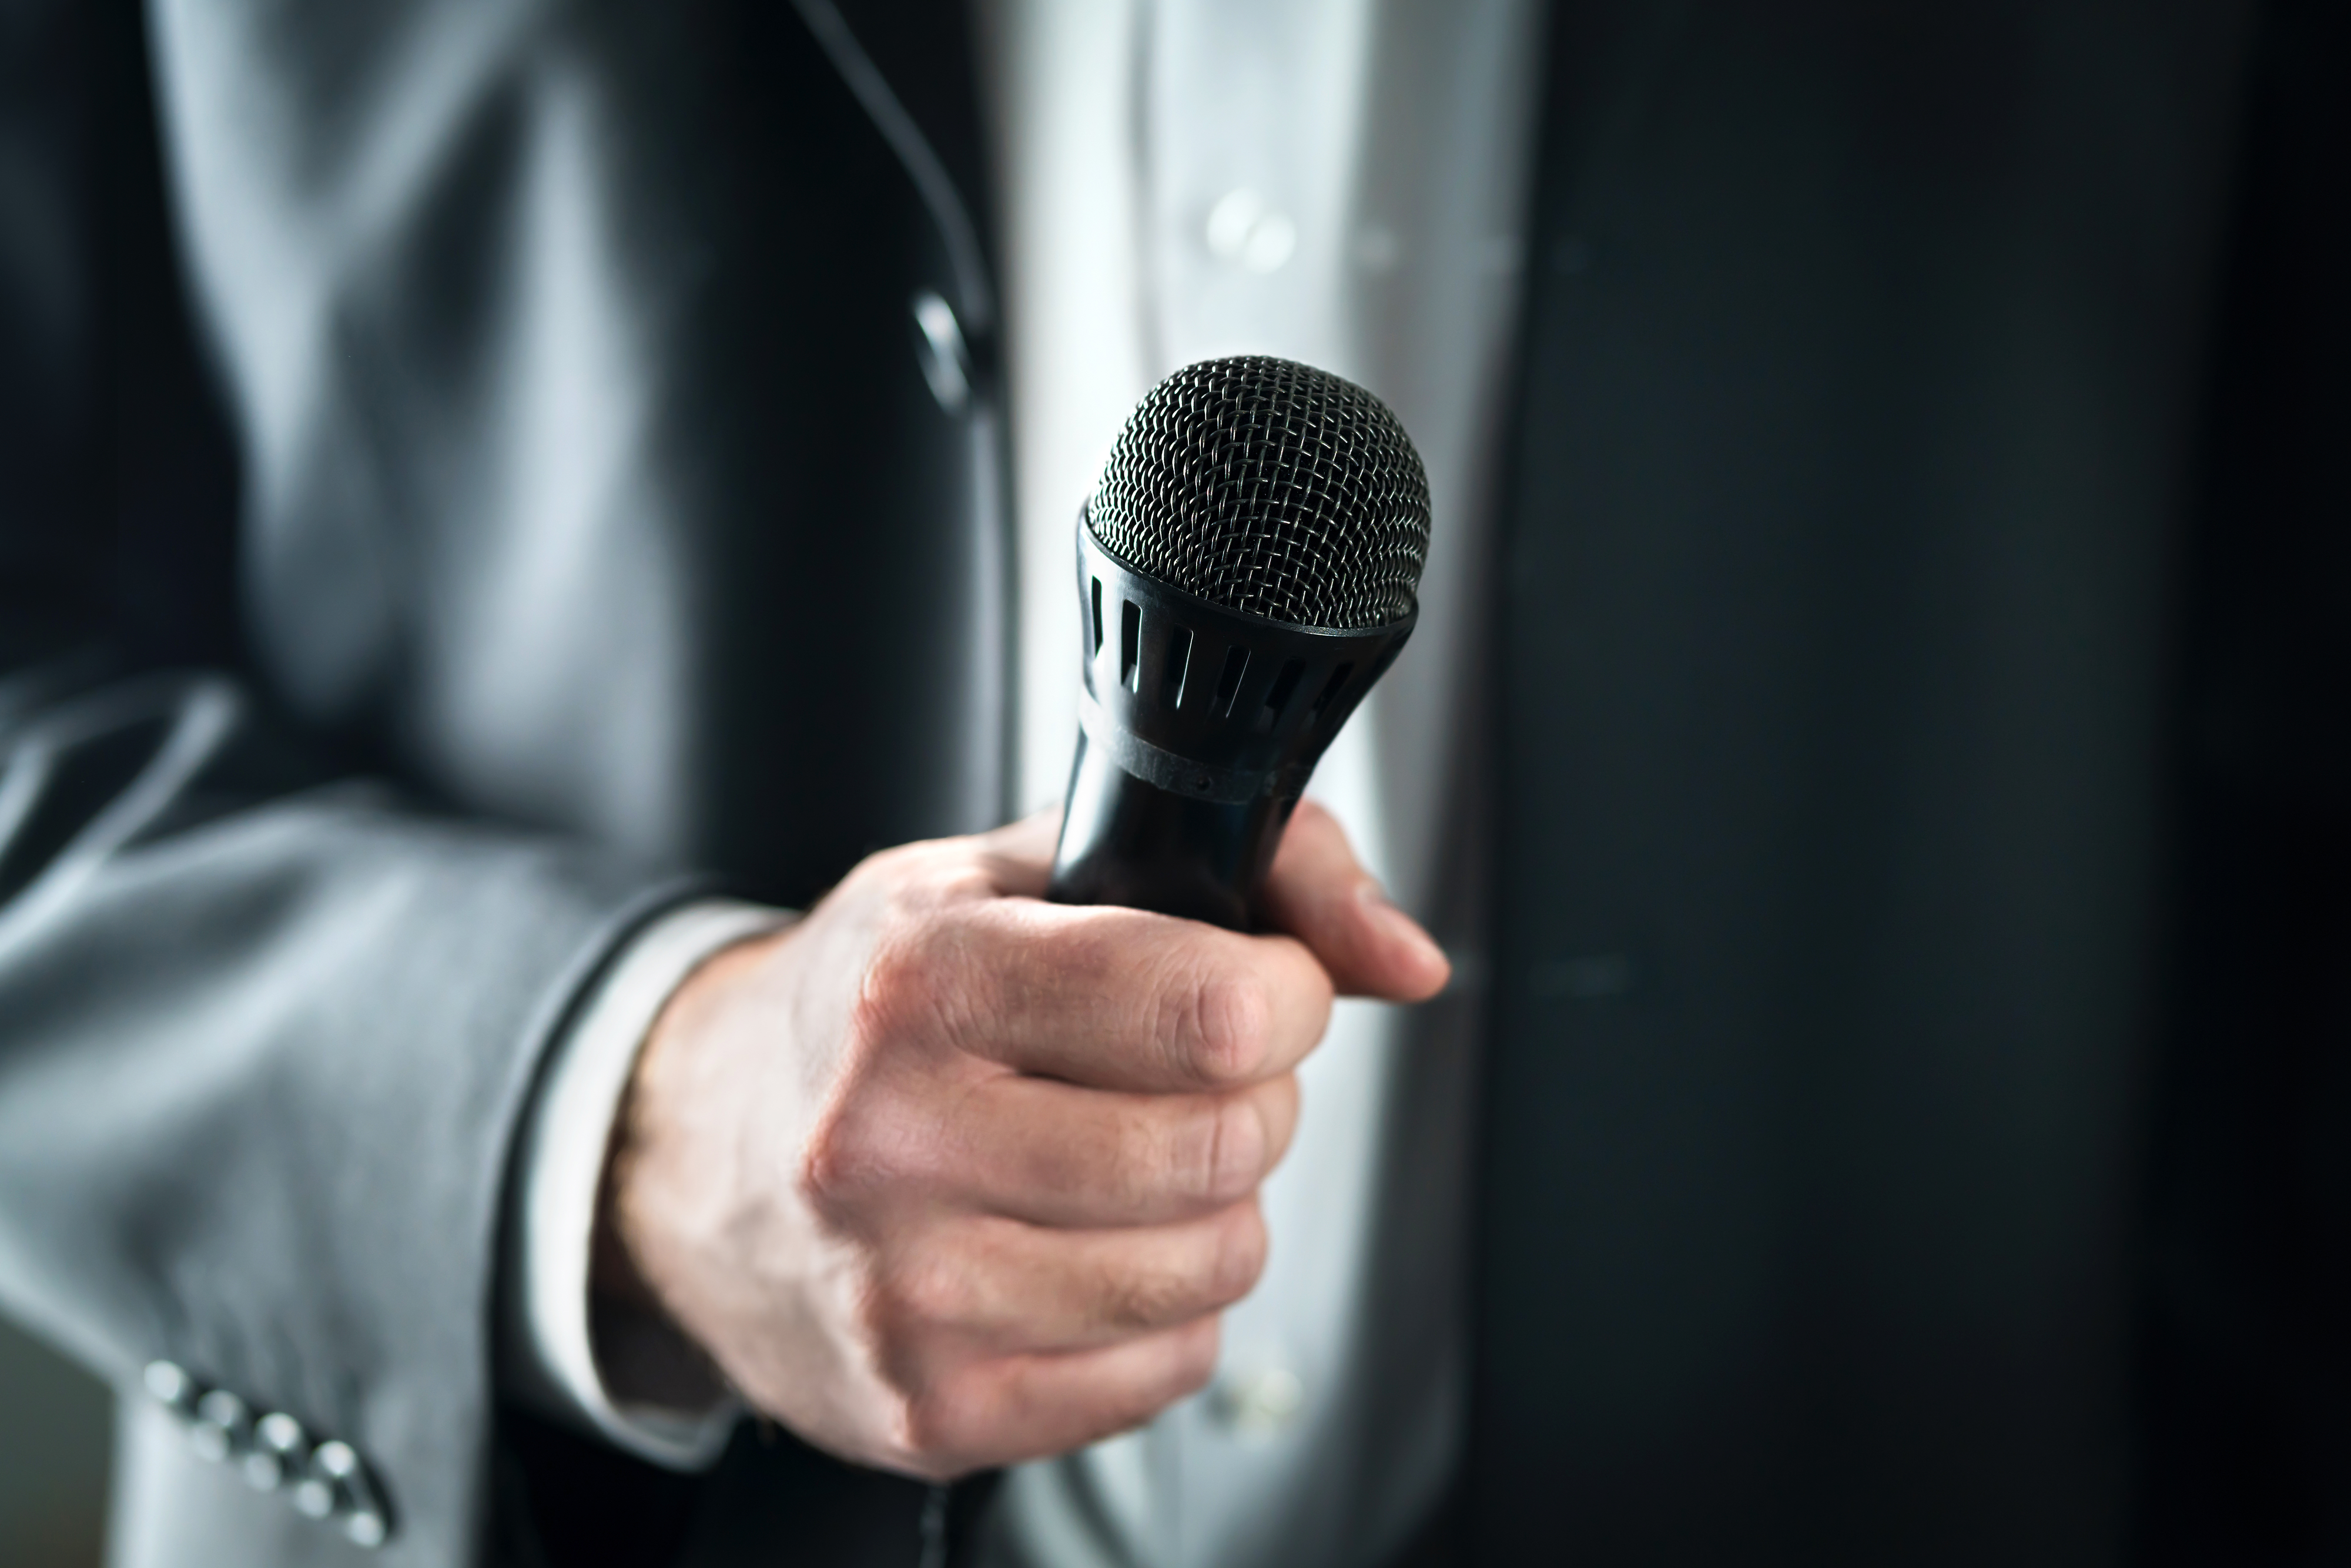 A person in a suit holding a mic